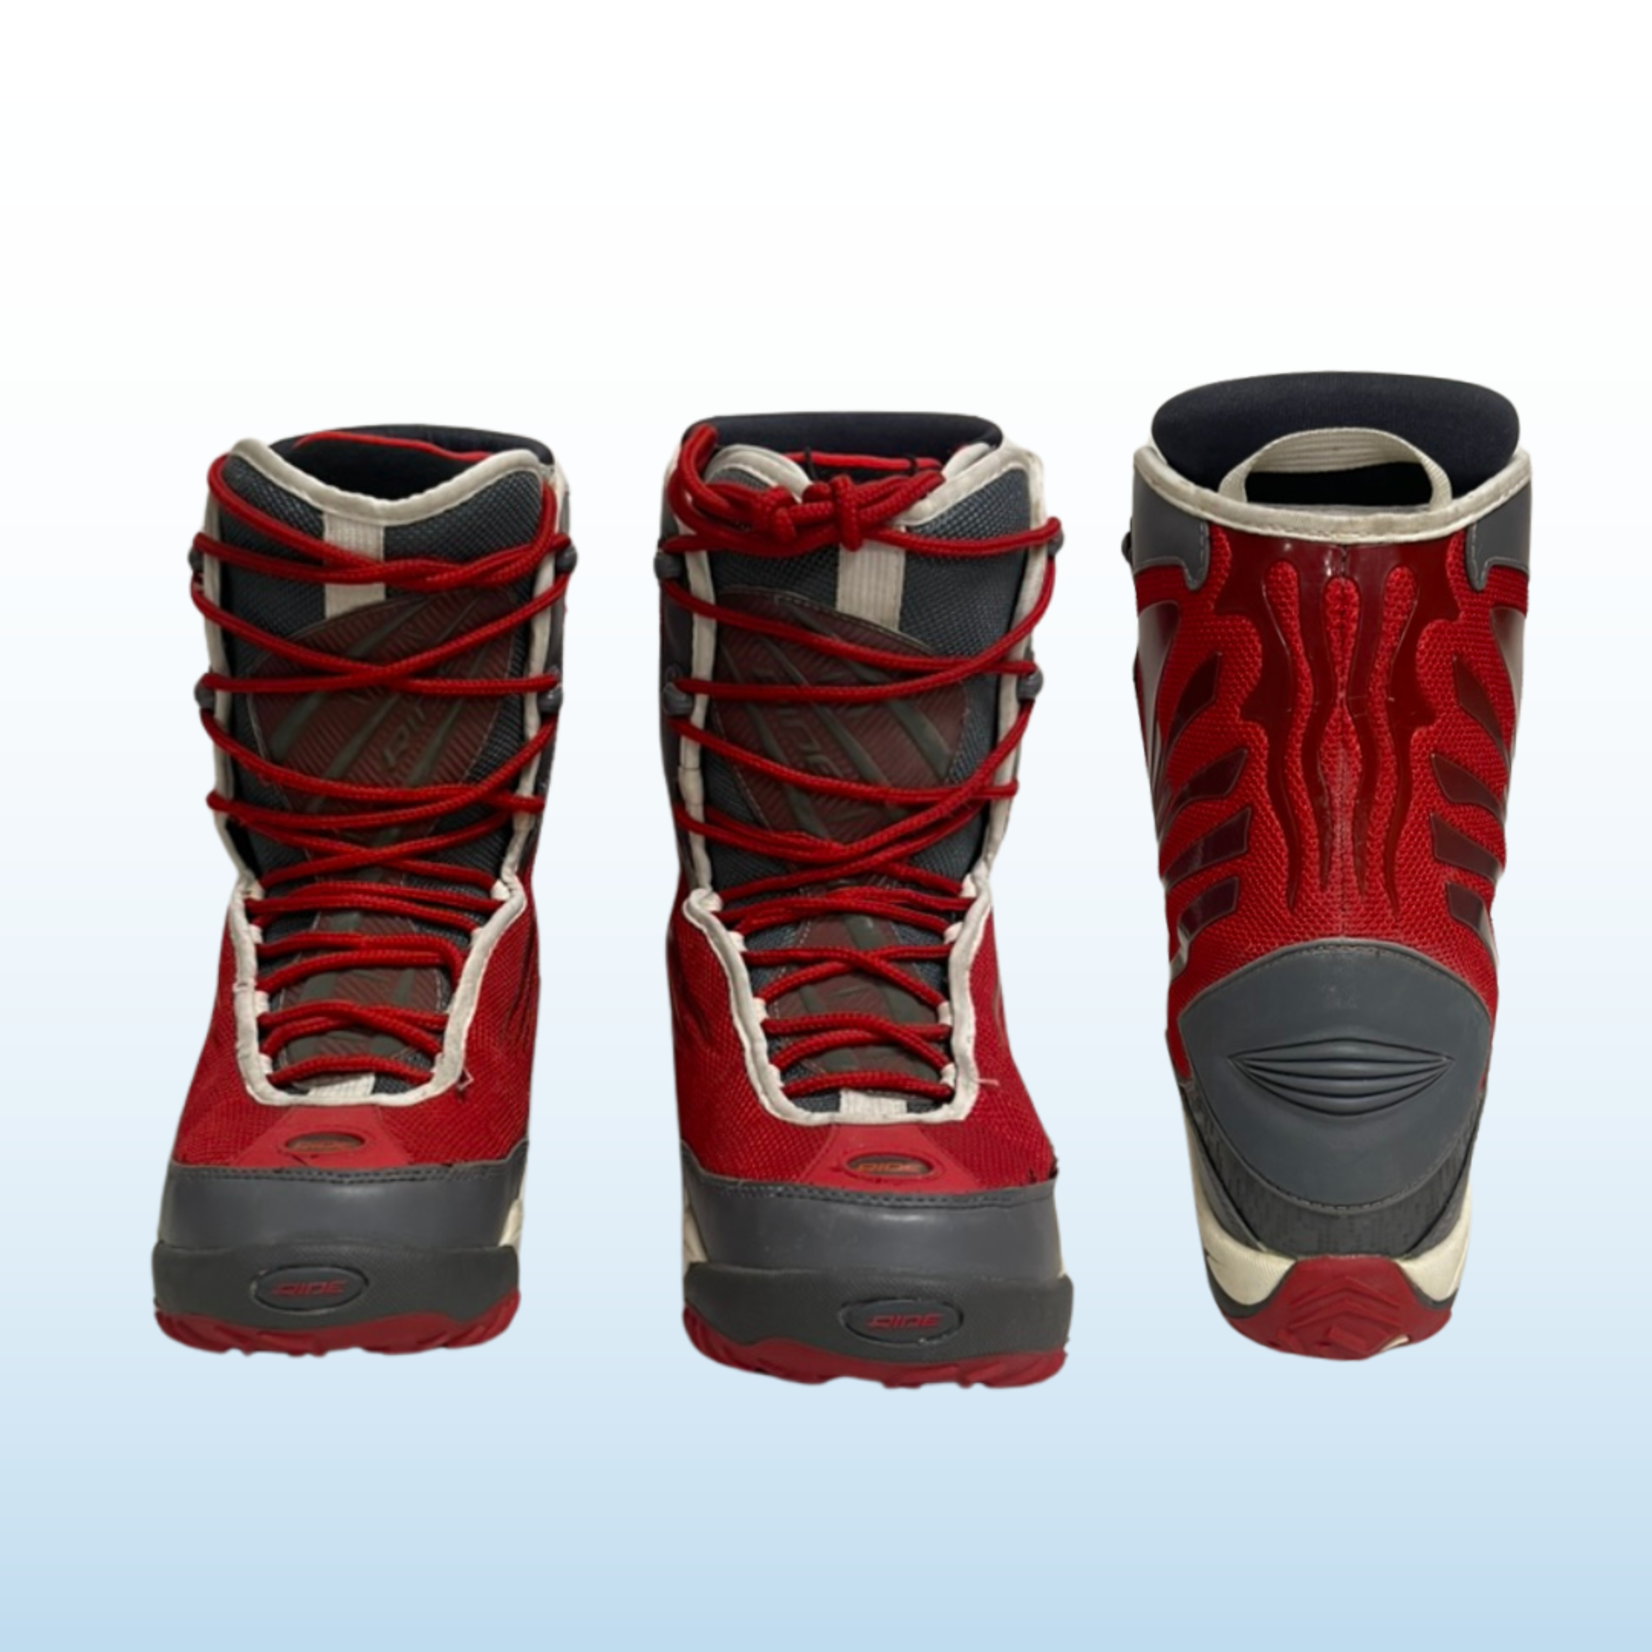 Ride Ride Orion Snowboard Boots, Size 5.5 WMNS